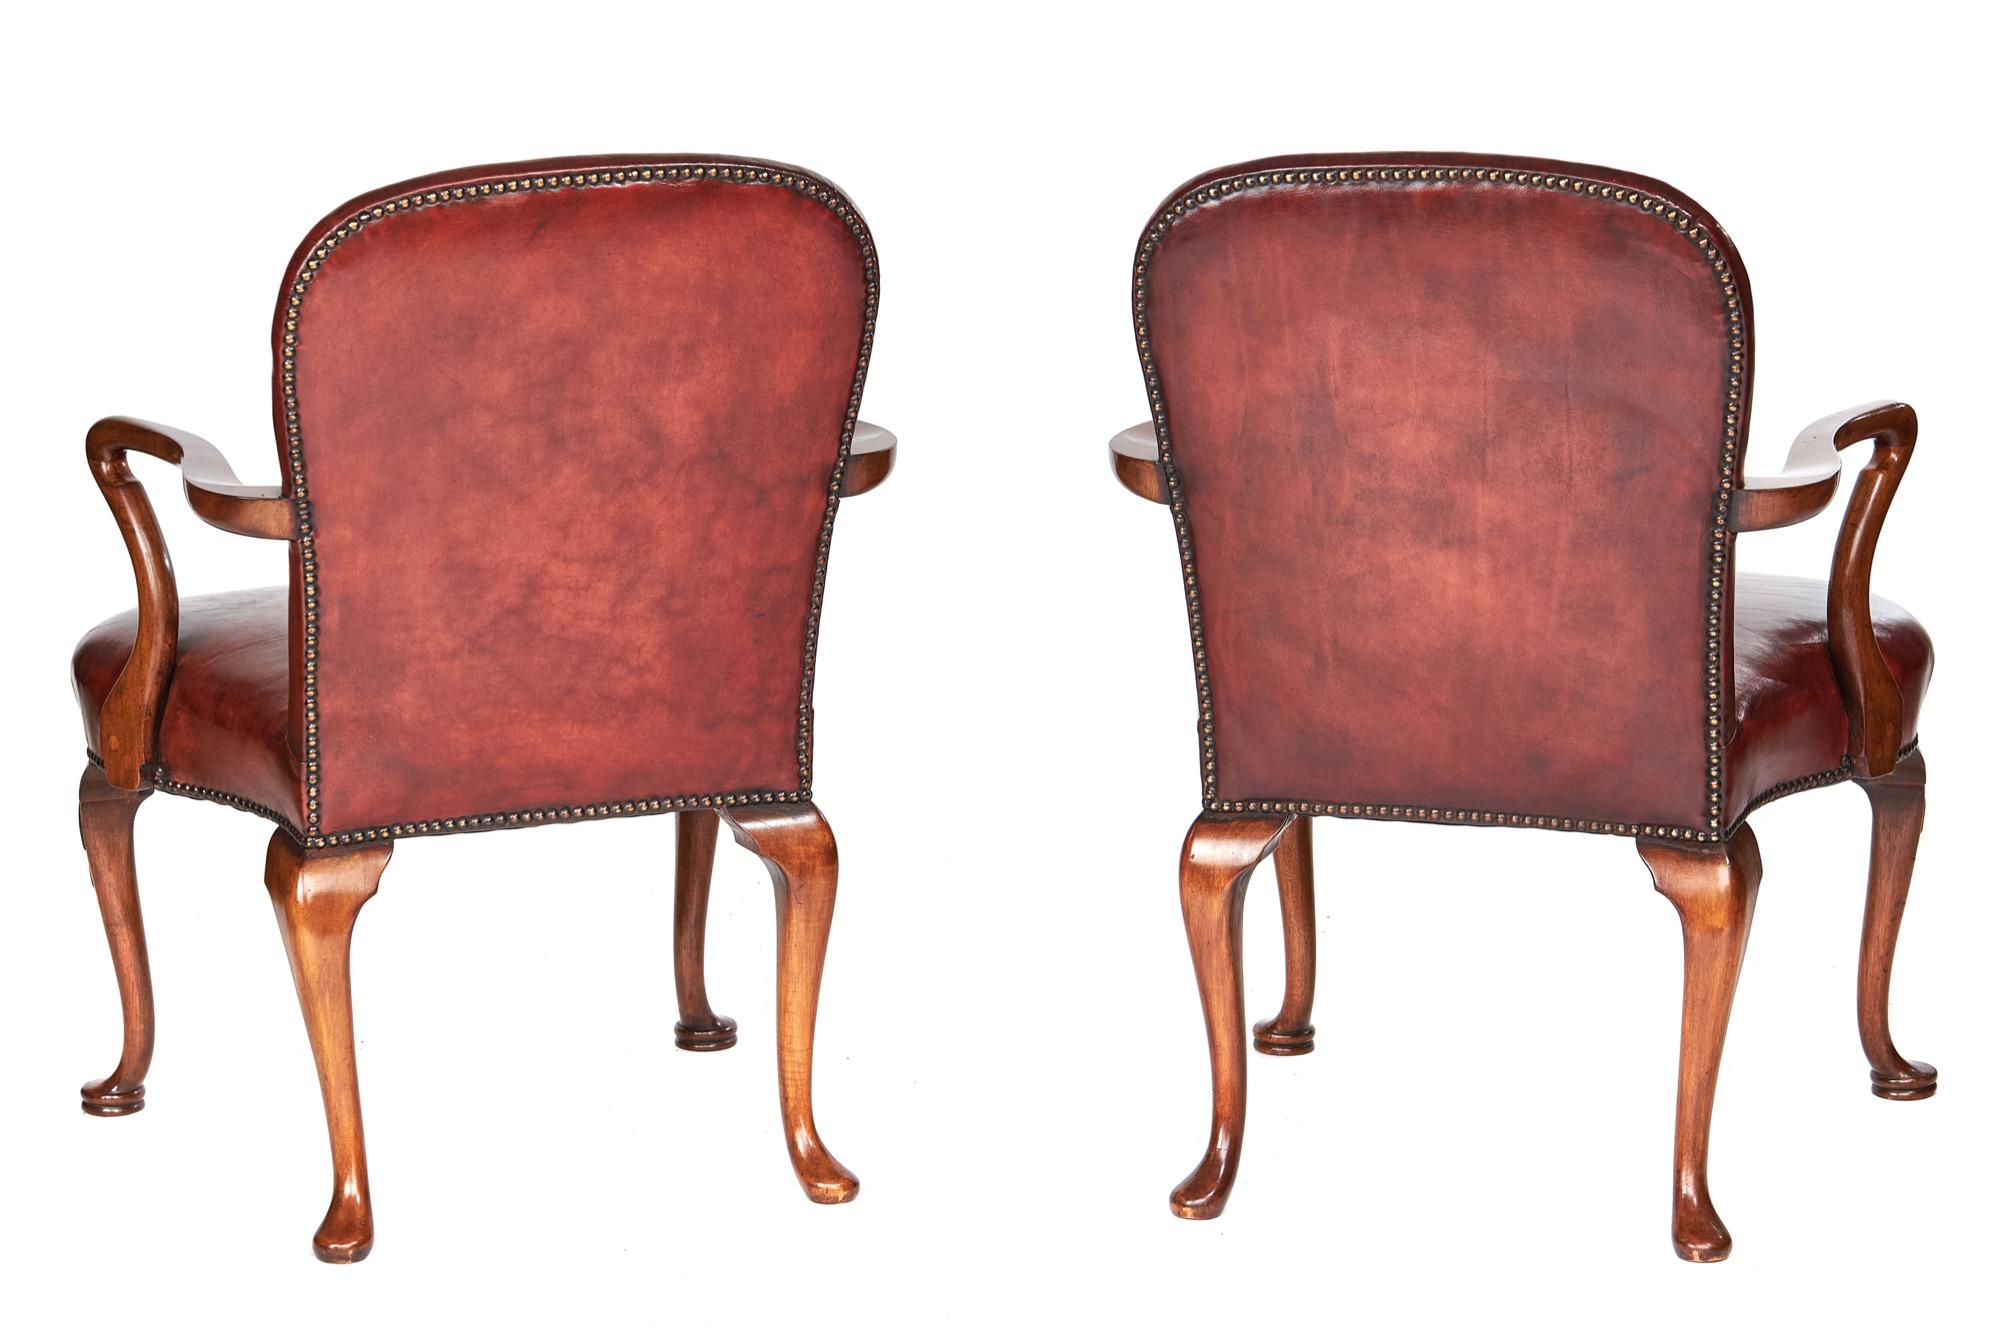 Pair Georgian revival walnut & leather open elbow chairs circa 1920s
Recently covered Leather upholstery, coloured to chestnut,
brass studded decoration,
Polished professionally by my French polishers i have used for over 30 years, 
Walnut open